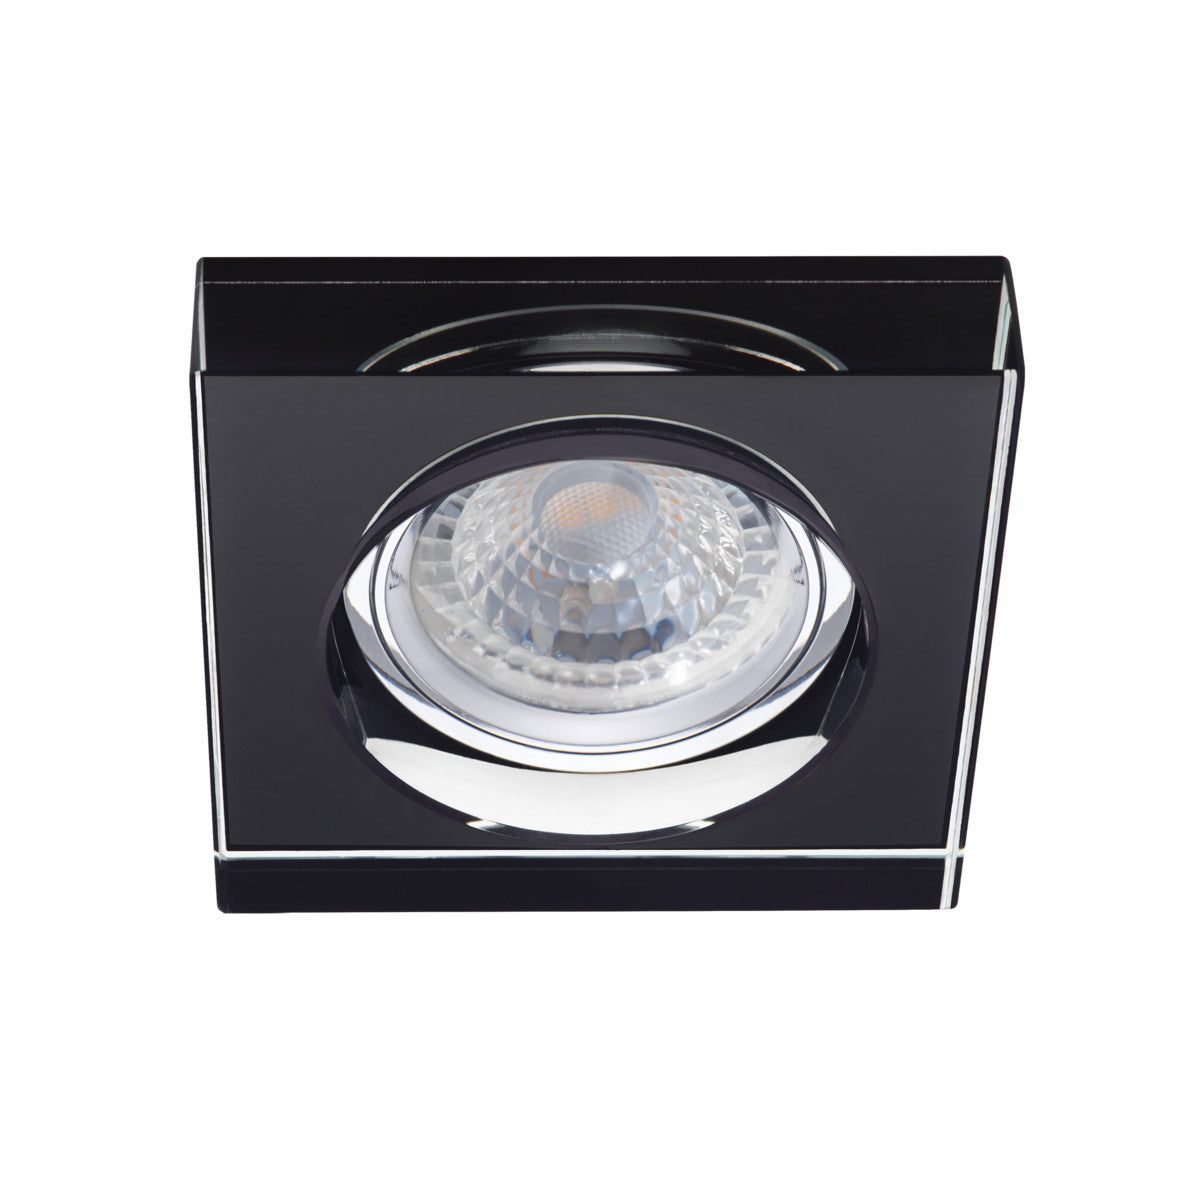 Kanlux MORTA Ceiling Recessed Mounted Round Square GU10 Spot Light Fitting